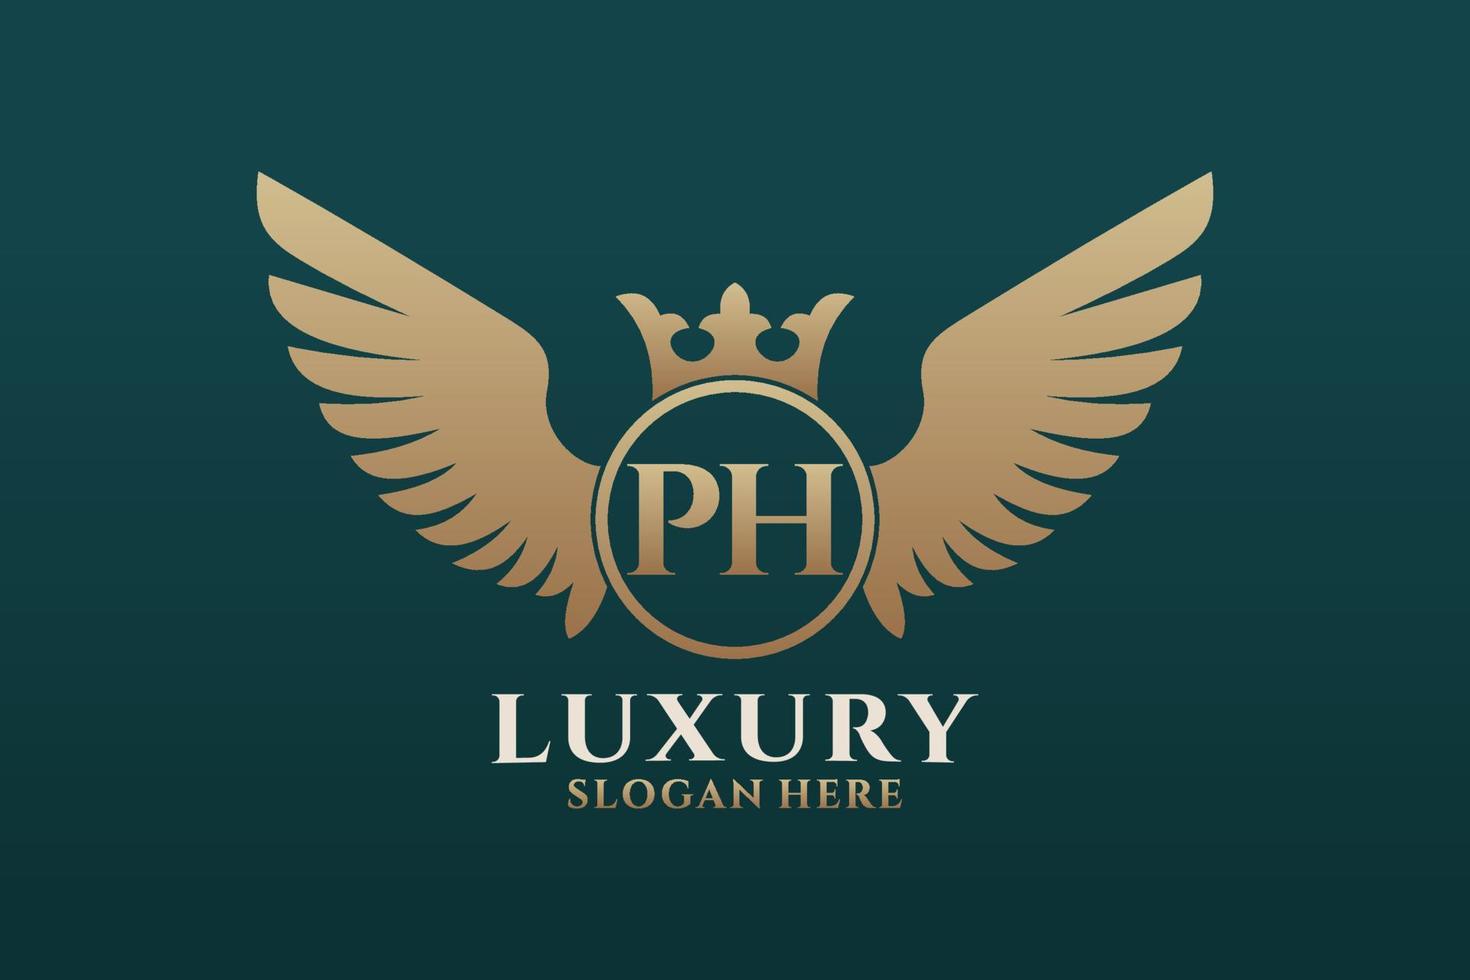 Luxury royal wing Letter PH crest Gold color Logo vector, Victory logo, crest logo, wing logo, vector logo template.